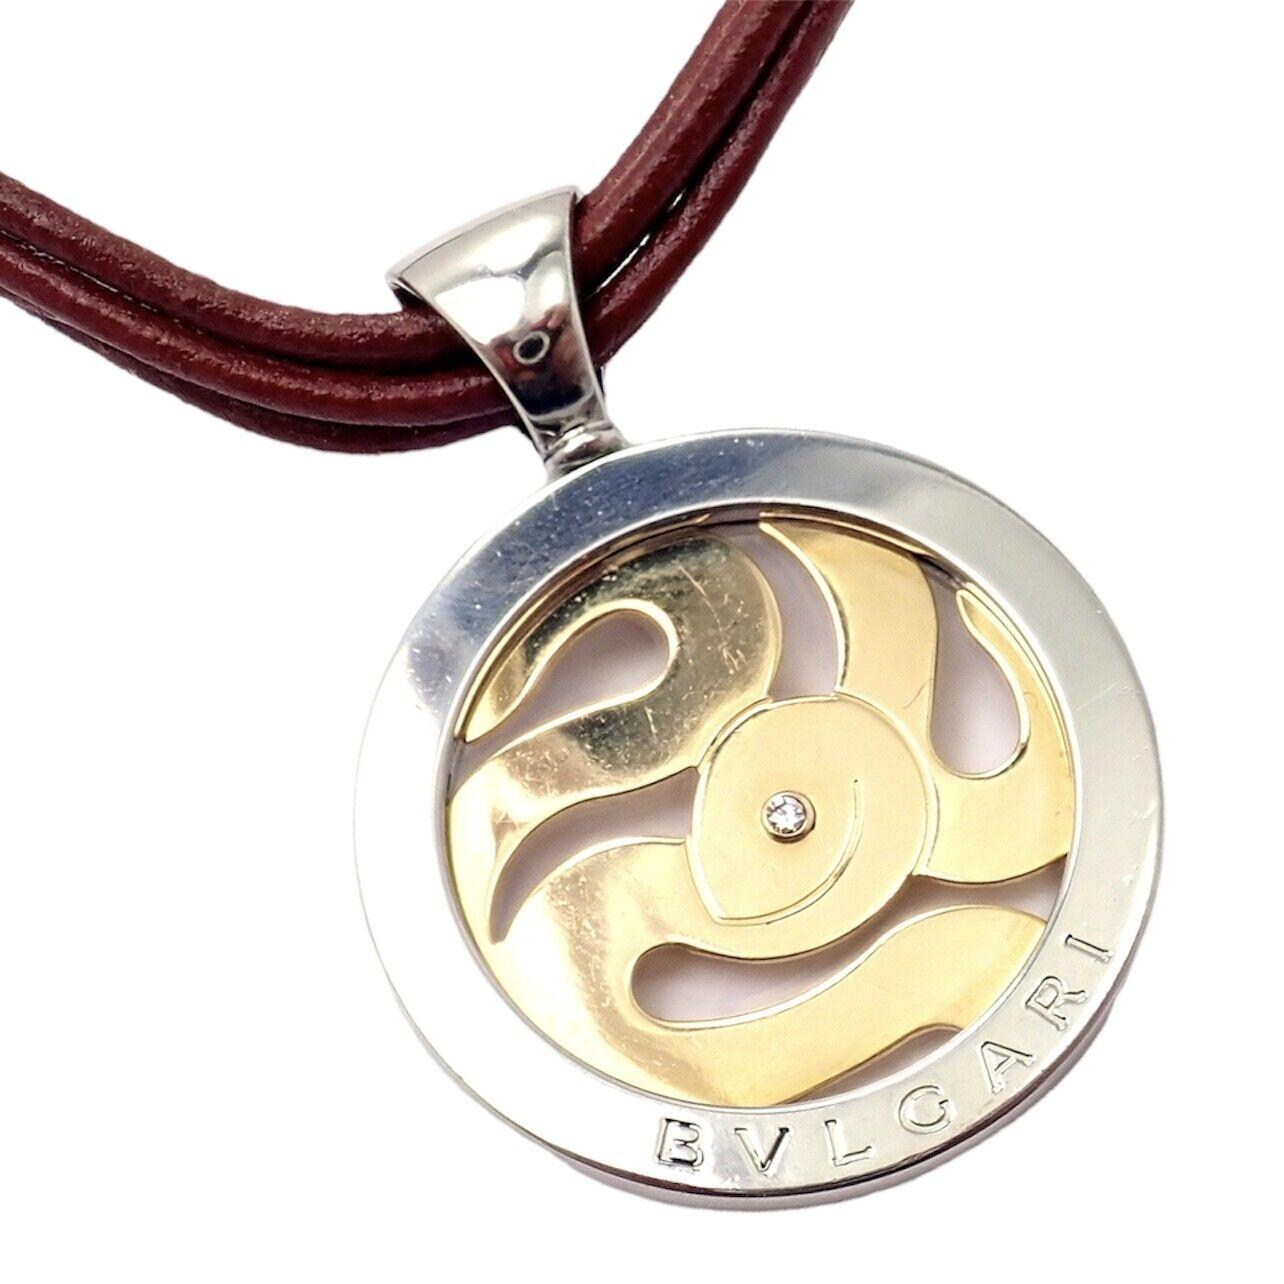 18k yellow gold and stainless steel diamond Tondo Snake pendant necklace by Bulgari.
With 1 round brilliant cut diamond total weight approximately 0.05ct
Details:
Pendant: 18k Yellow Gold And Stainless Steel
Necklace: 5 leather strand, burgundy